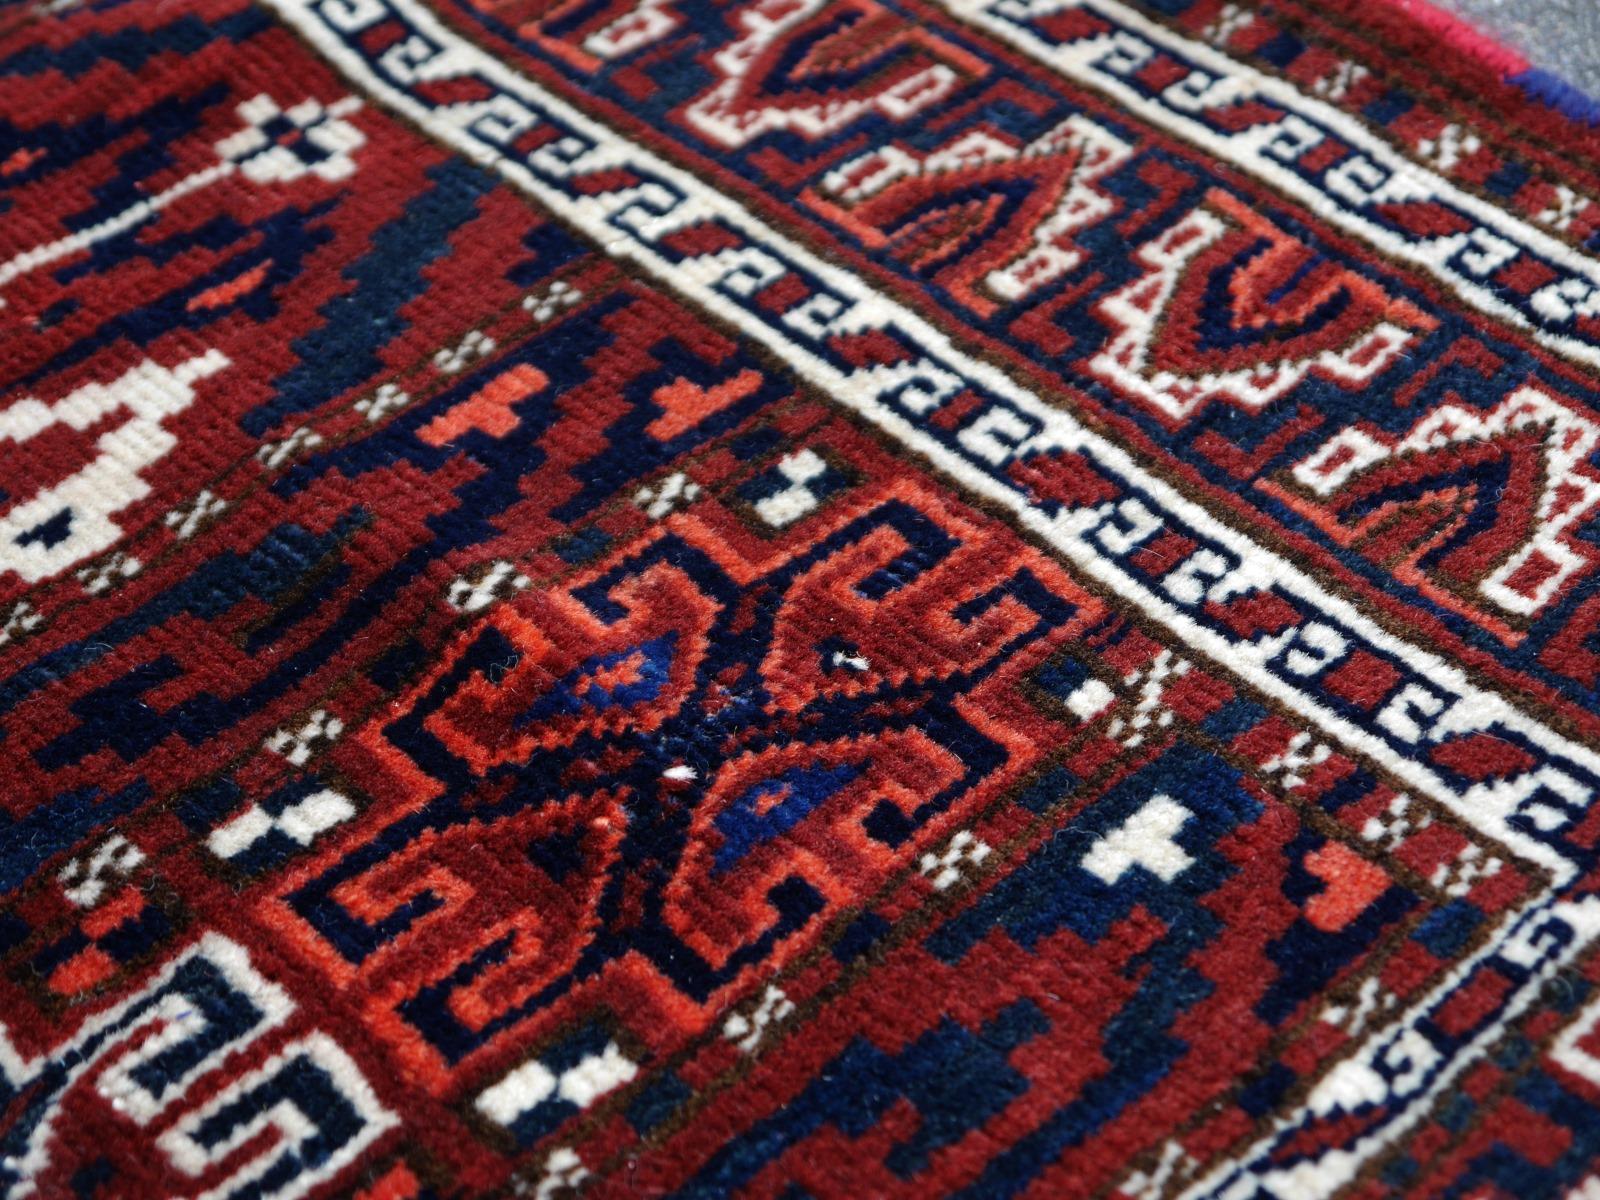 Yomud Tribeal Turkmen Turkoman Antique Rug with Ram Motive Hand Knotted Carpet For Sale 7